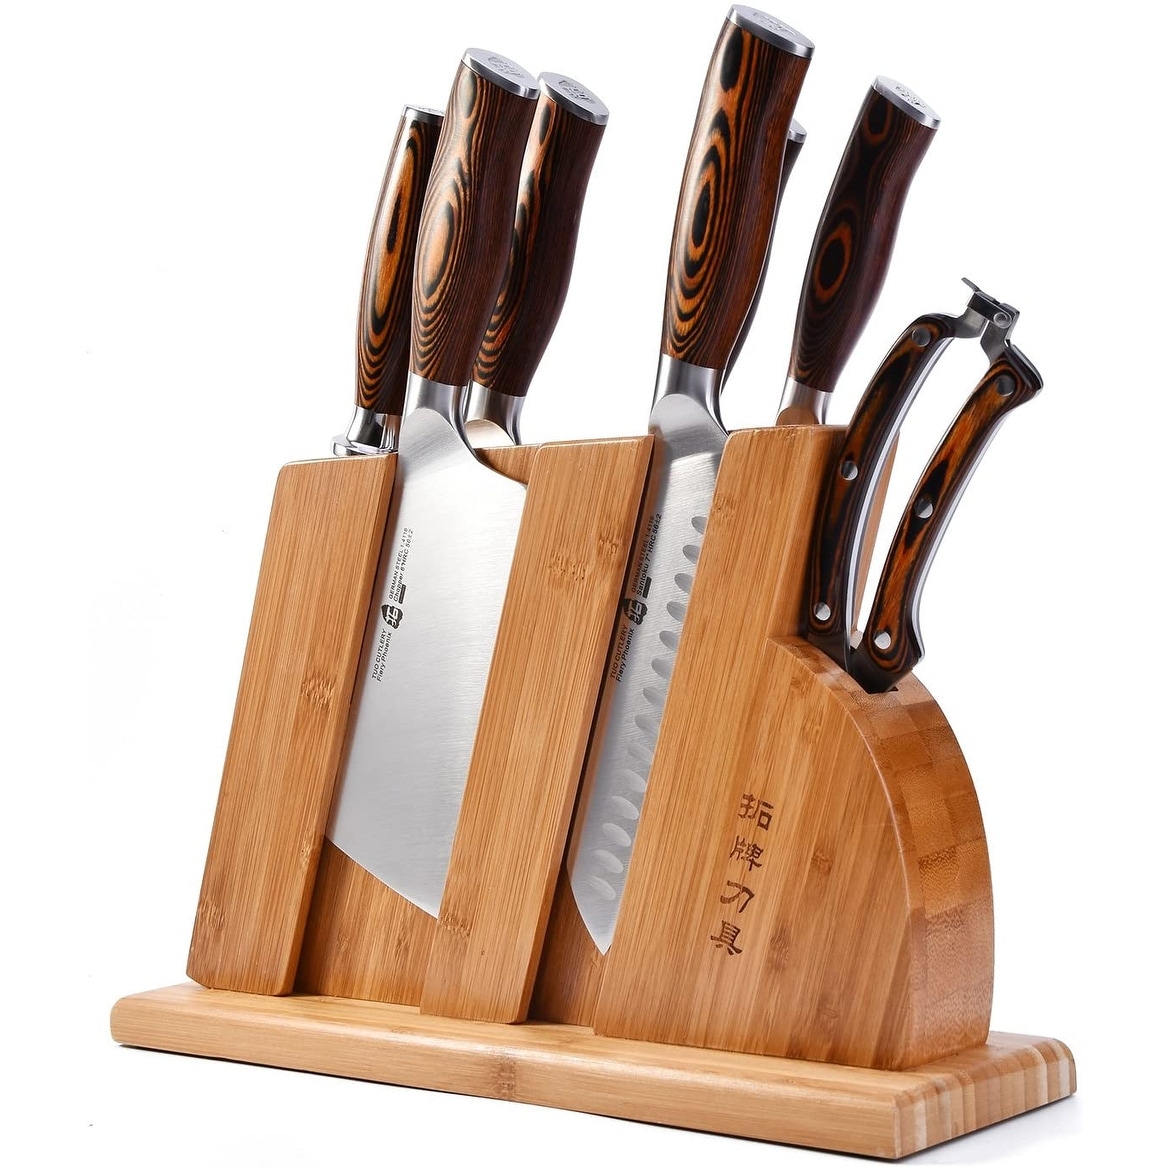 https://ak1.ostkcdn.com/images/products/is/images/direct/03941c41628cd3b4b8782ef59c4eac177624edb5/Tuo-8pcs-Knives-Set-w-Wooden-Block-w-Pakkawood-Handle%2CFiery-Series.jpg